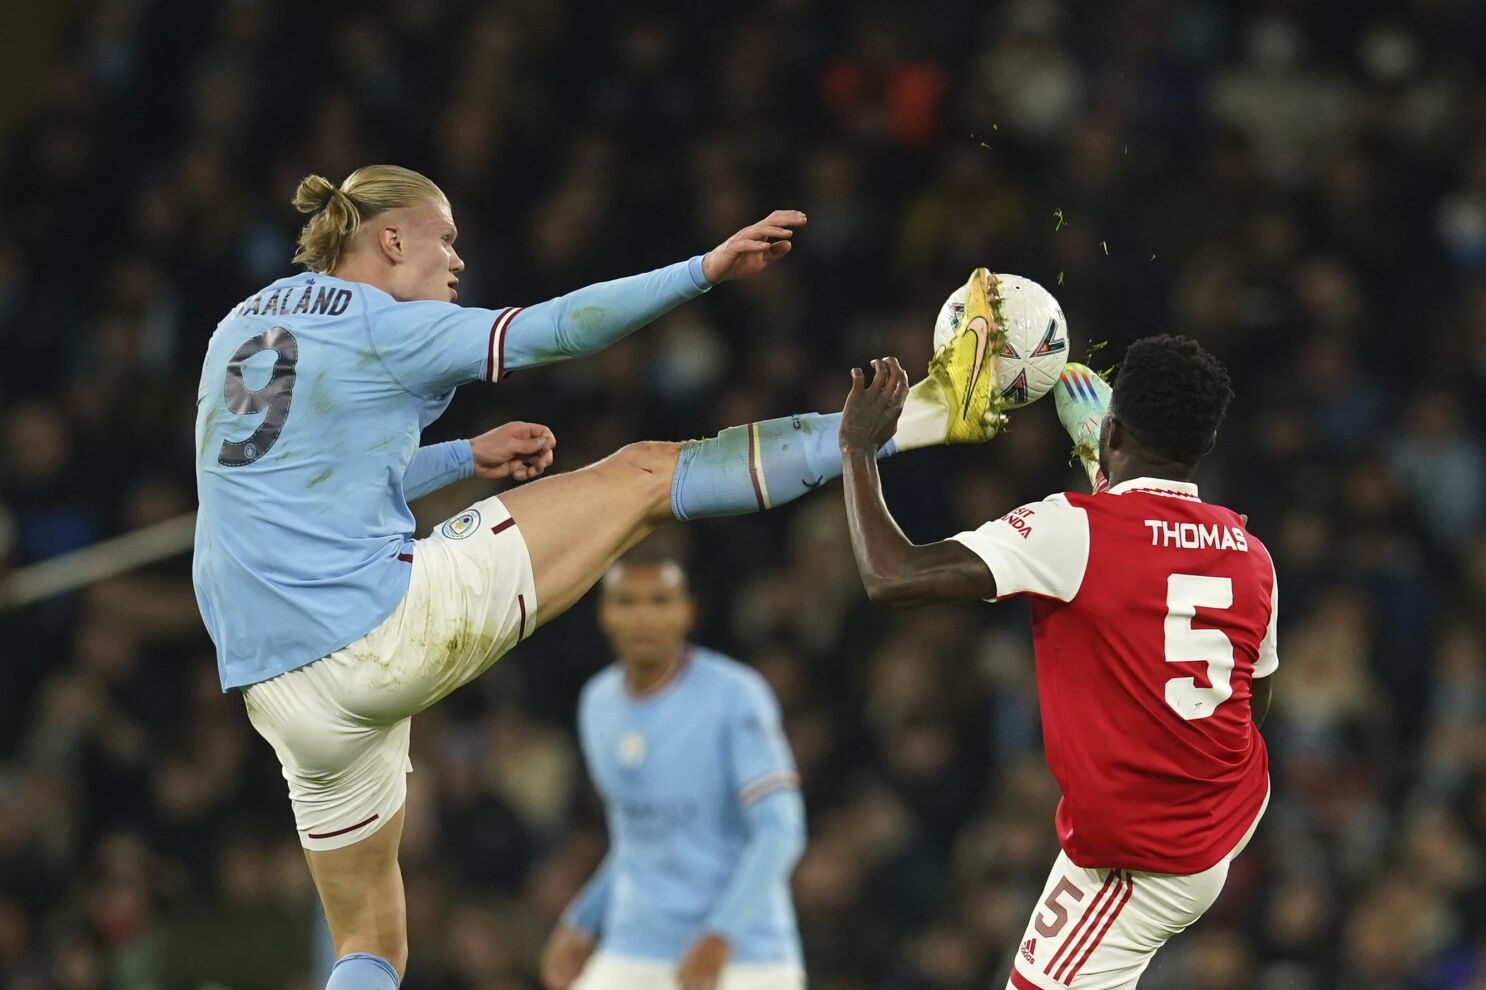 Man City knocks out Arsenal 1-0 in the FA Cup - The San Diego Union-Tribune